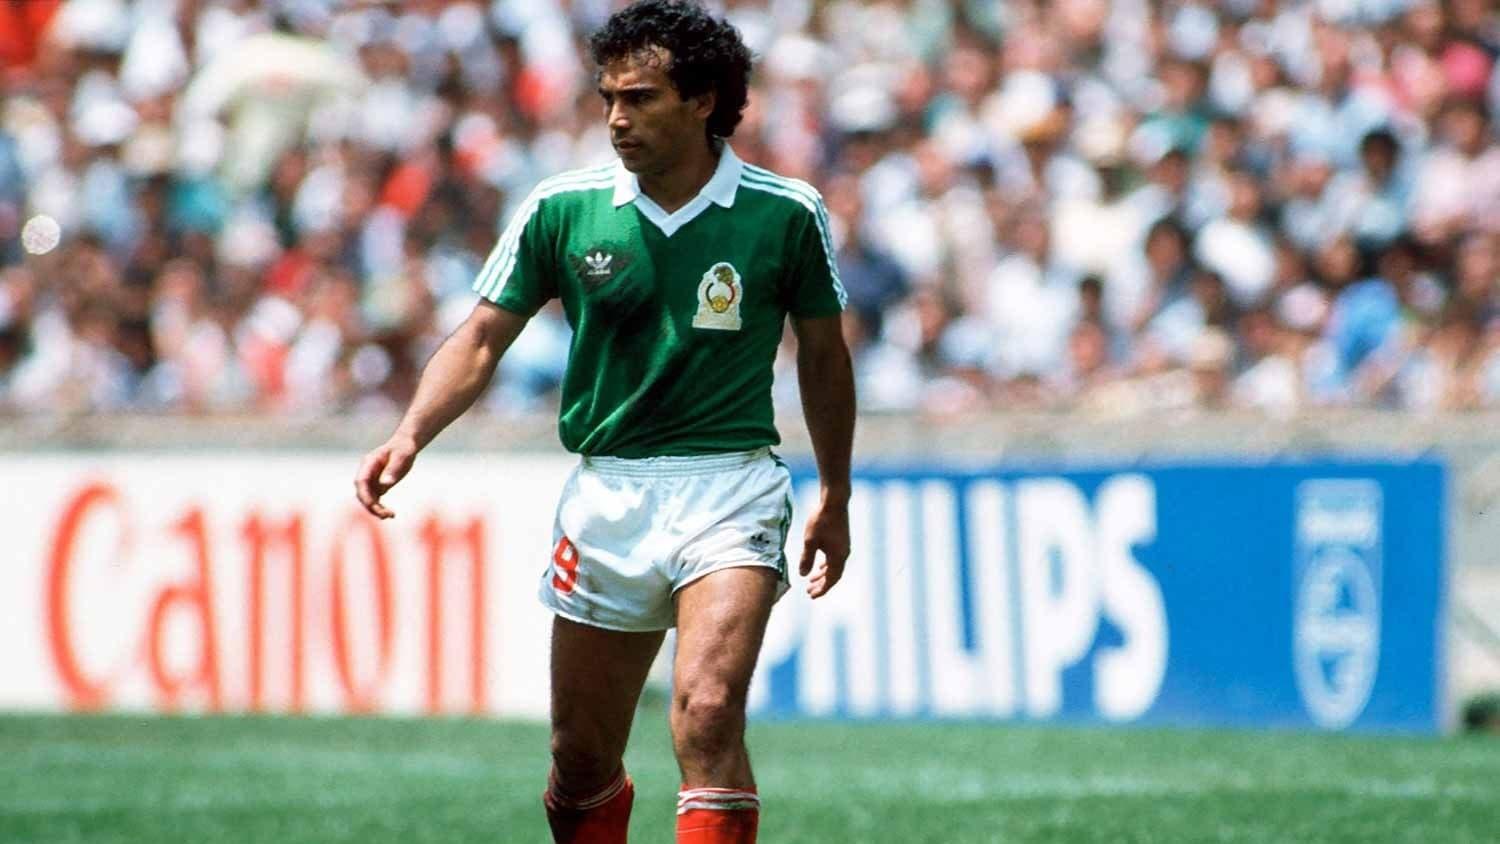 Hugo Sanchez, the Goal and the Glory backdrop